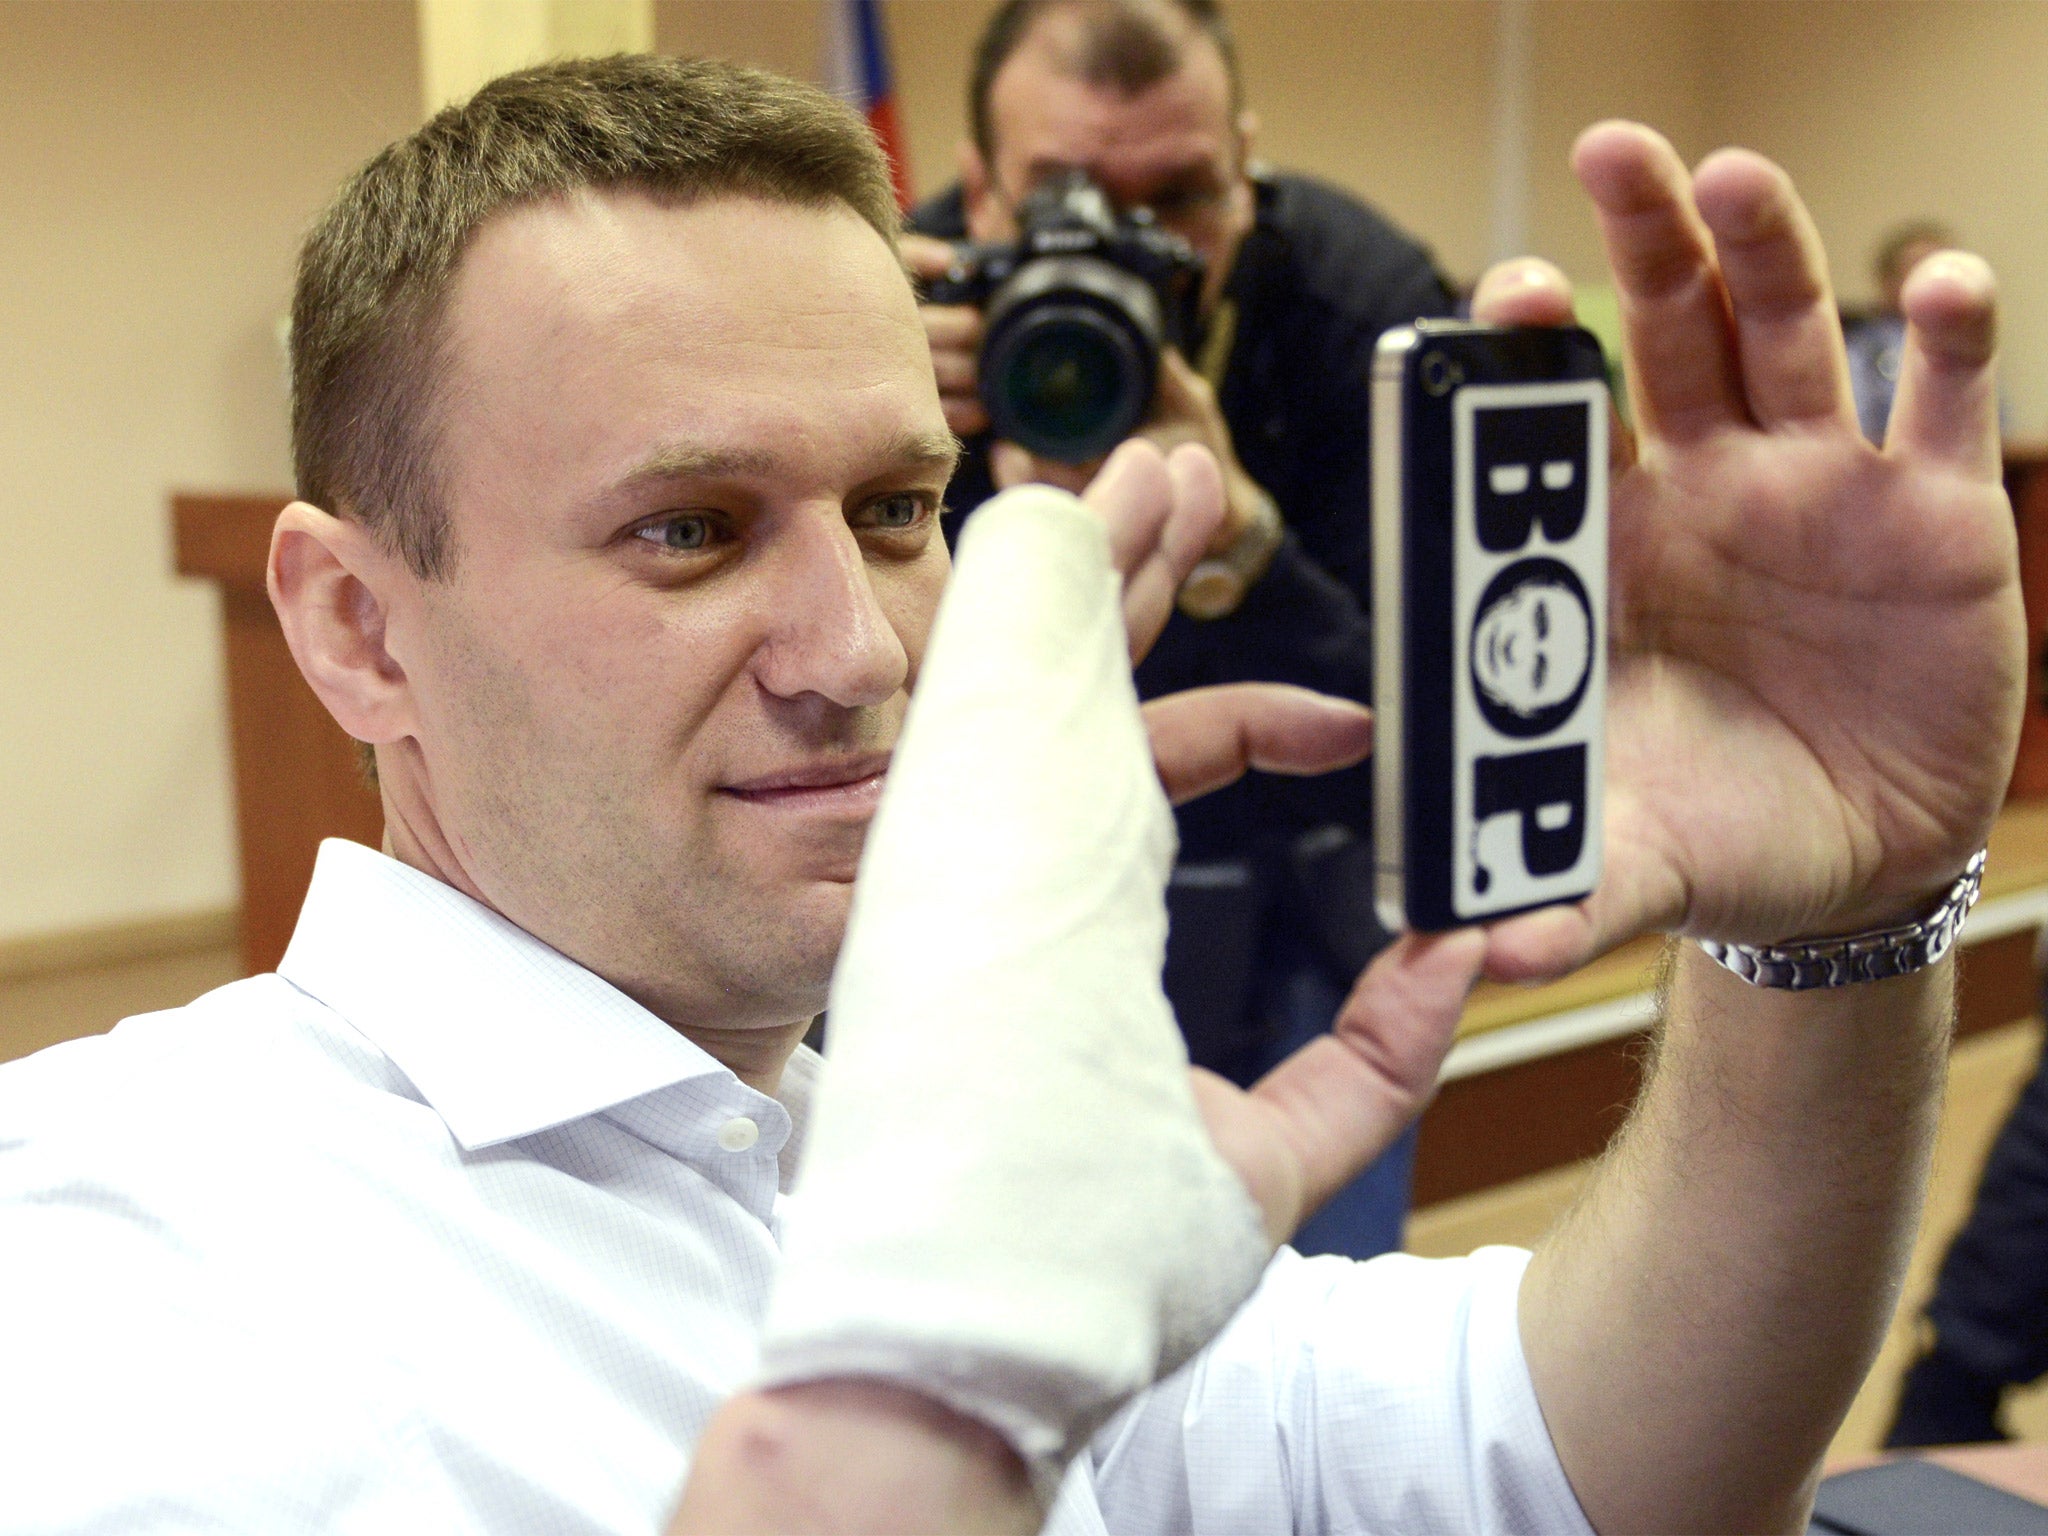 Russian opposition leader Alexei Navalny takes photos on his smartphone during his court appearance in Kirov